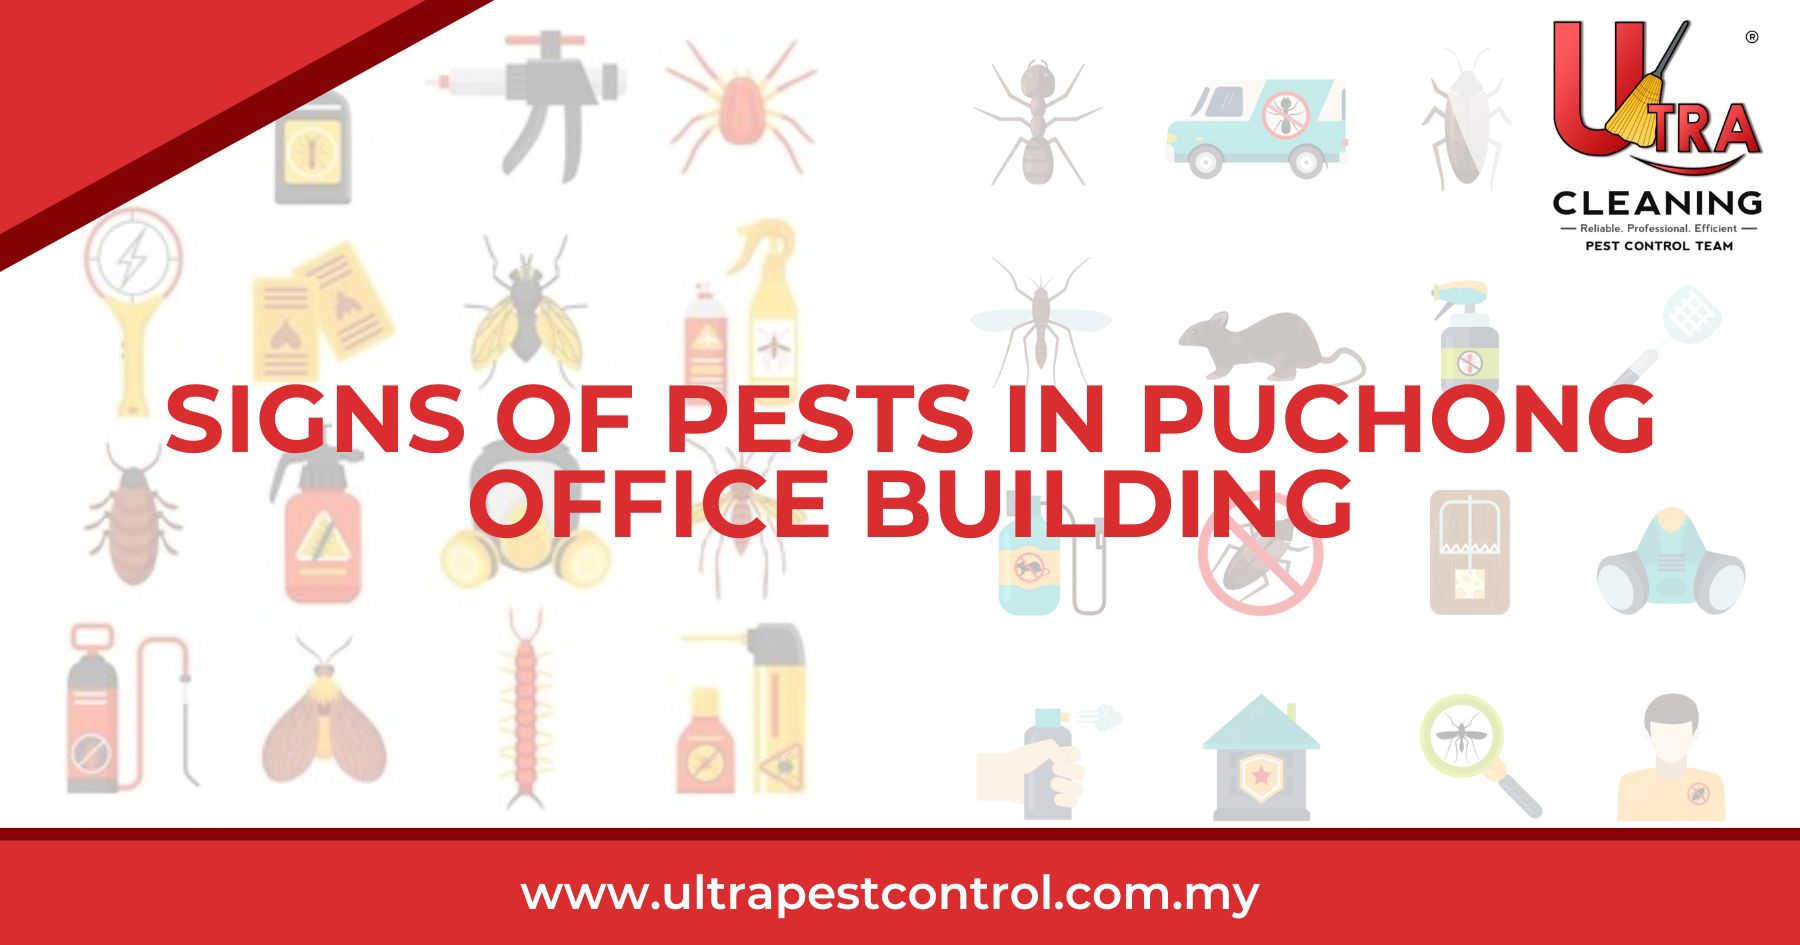 You are currently viewing Signs of Pests in Puchong Office Building